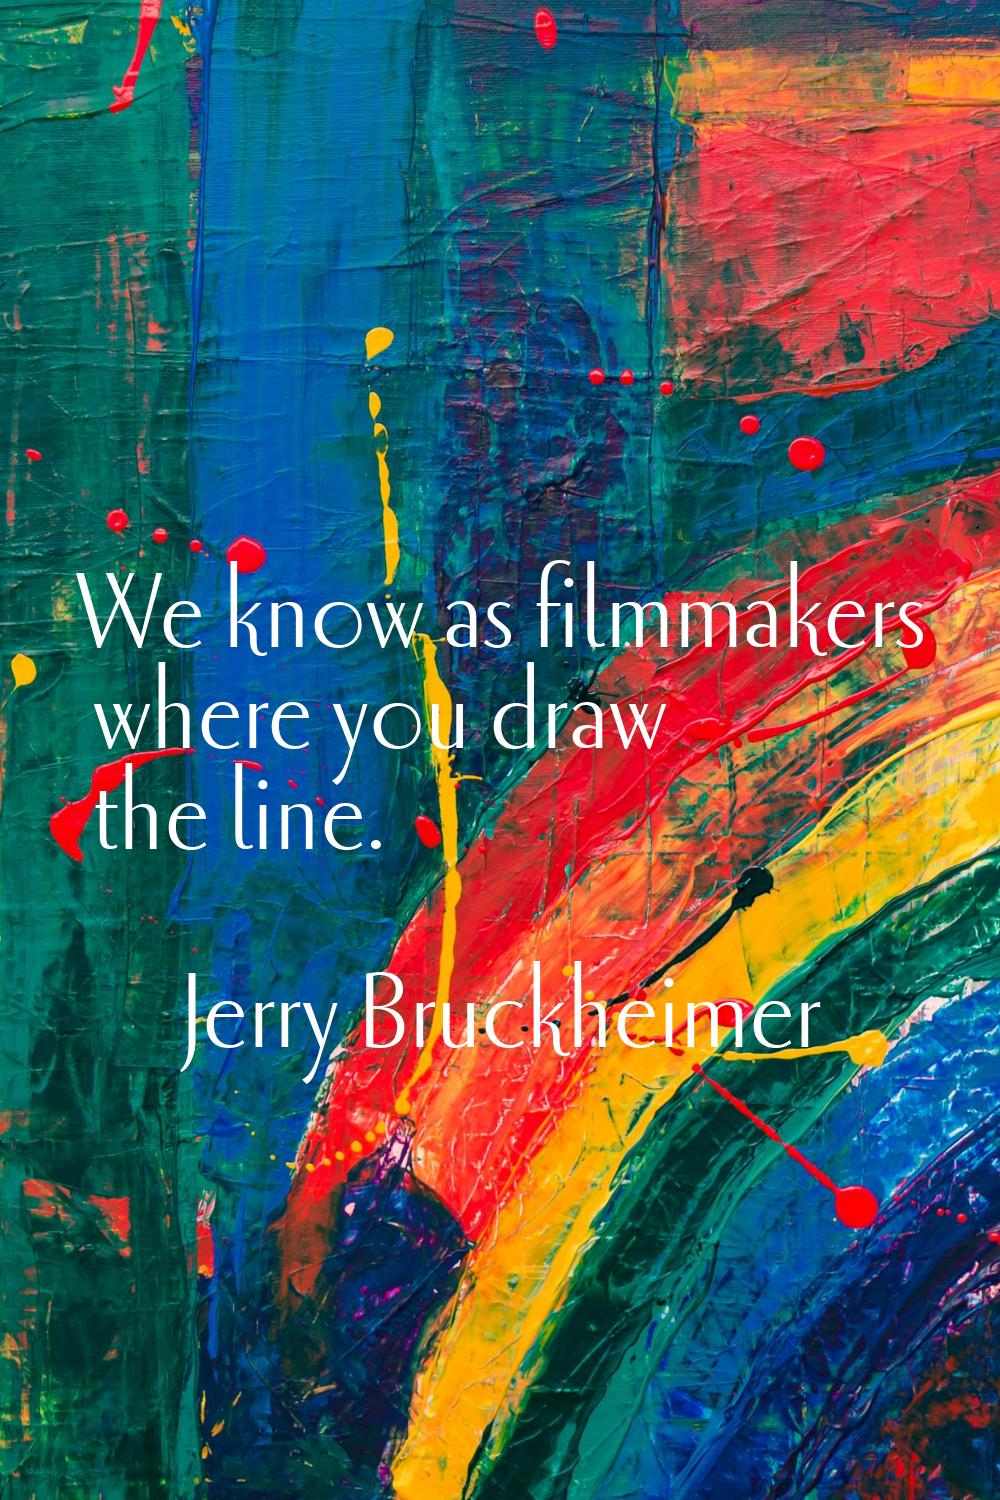 We know as filmmakers where you draw the line.